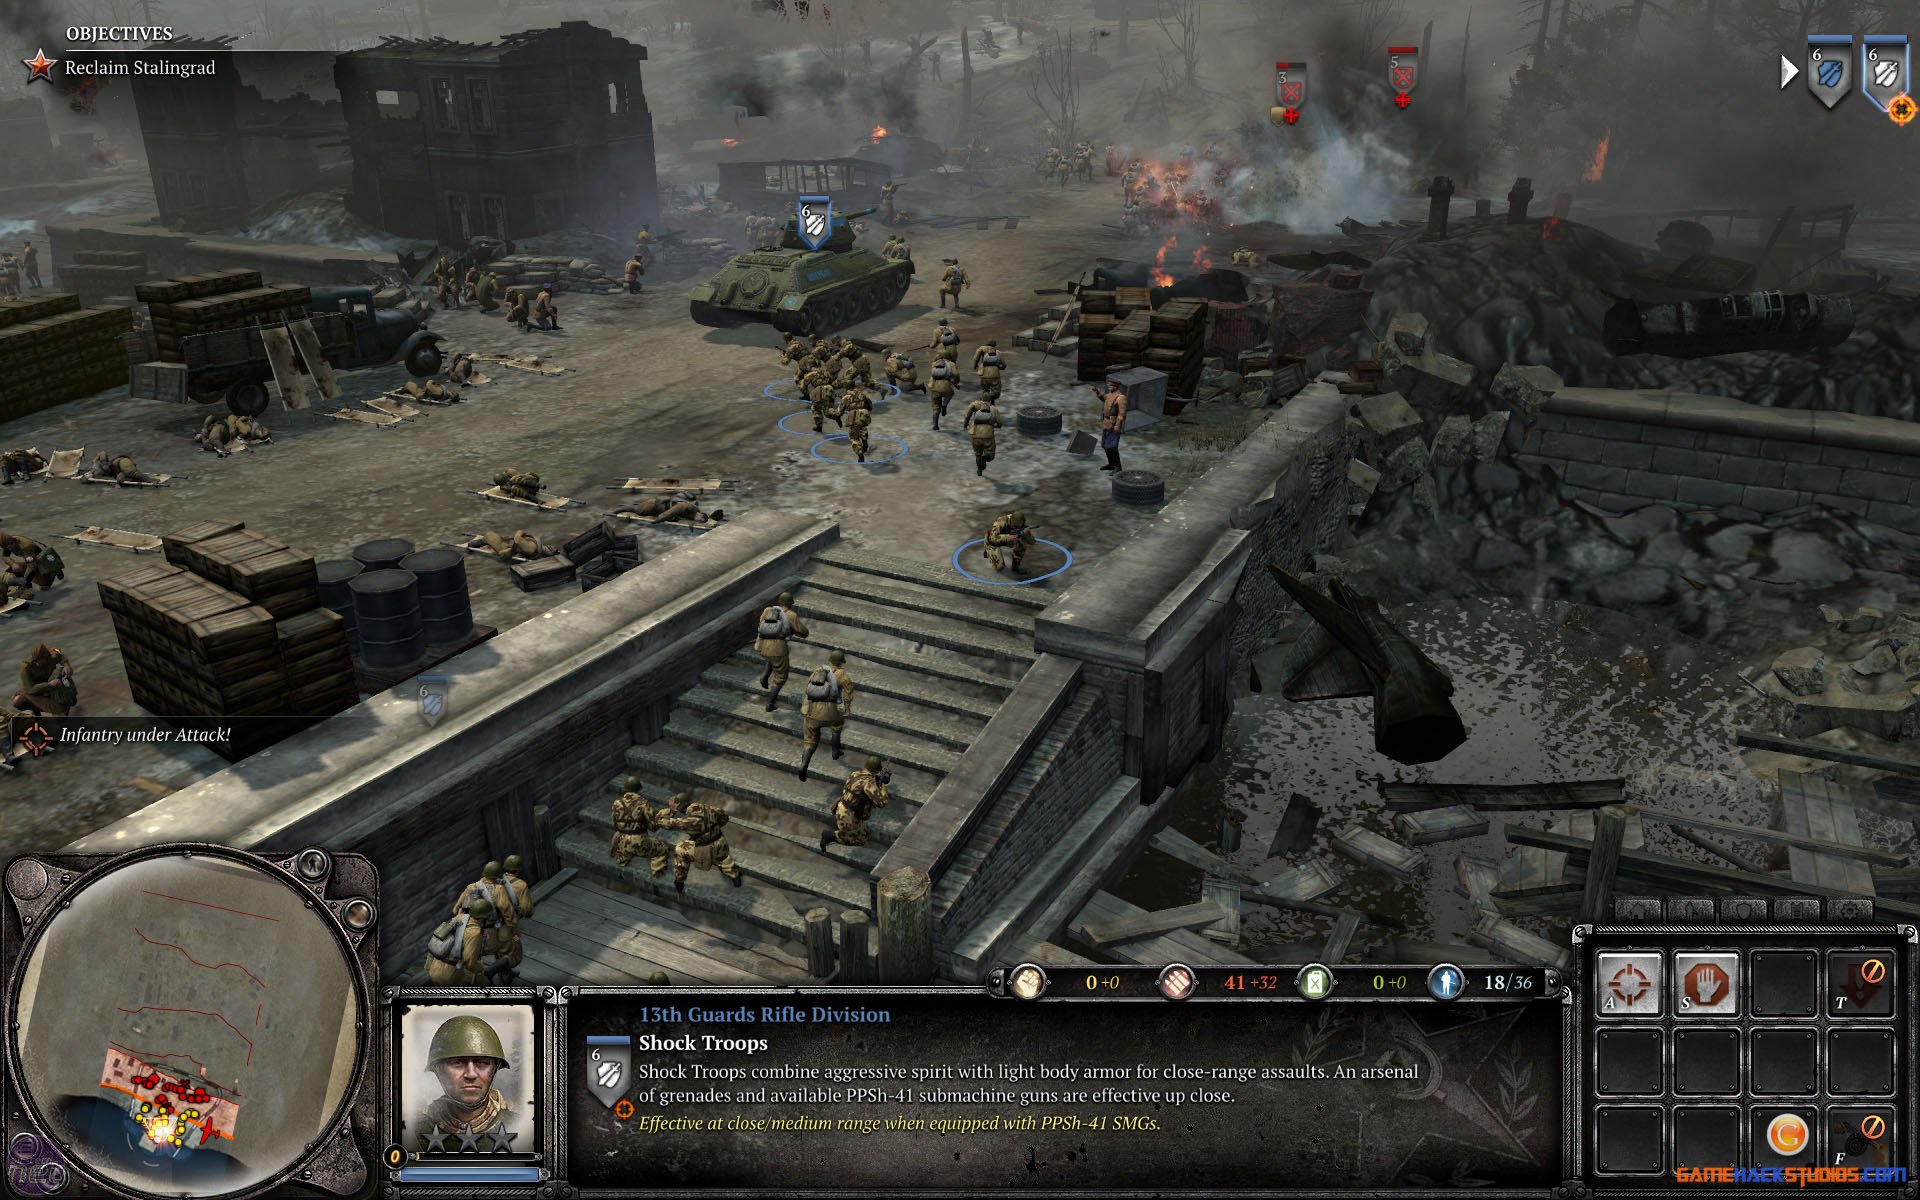 Company Of Heroes 2 Skirmish Maps Download